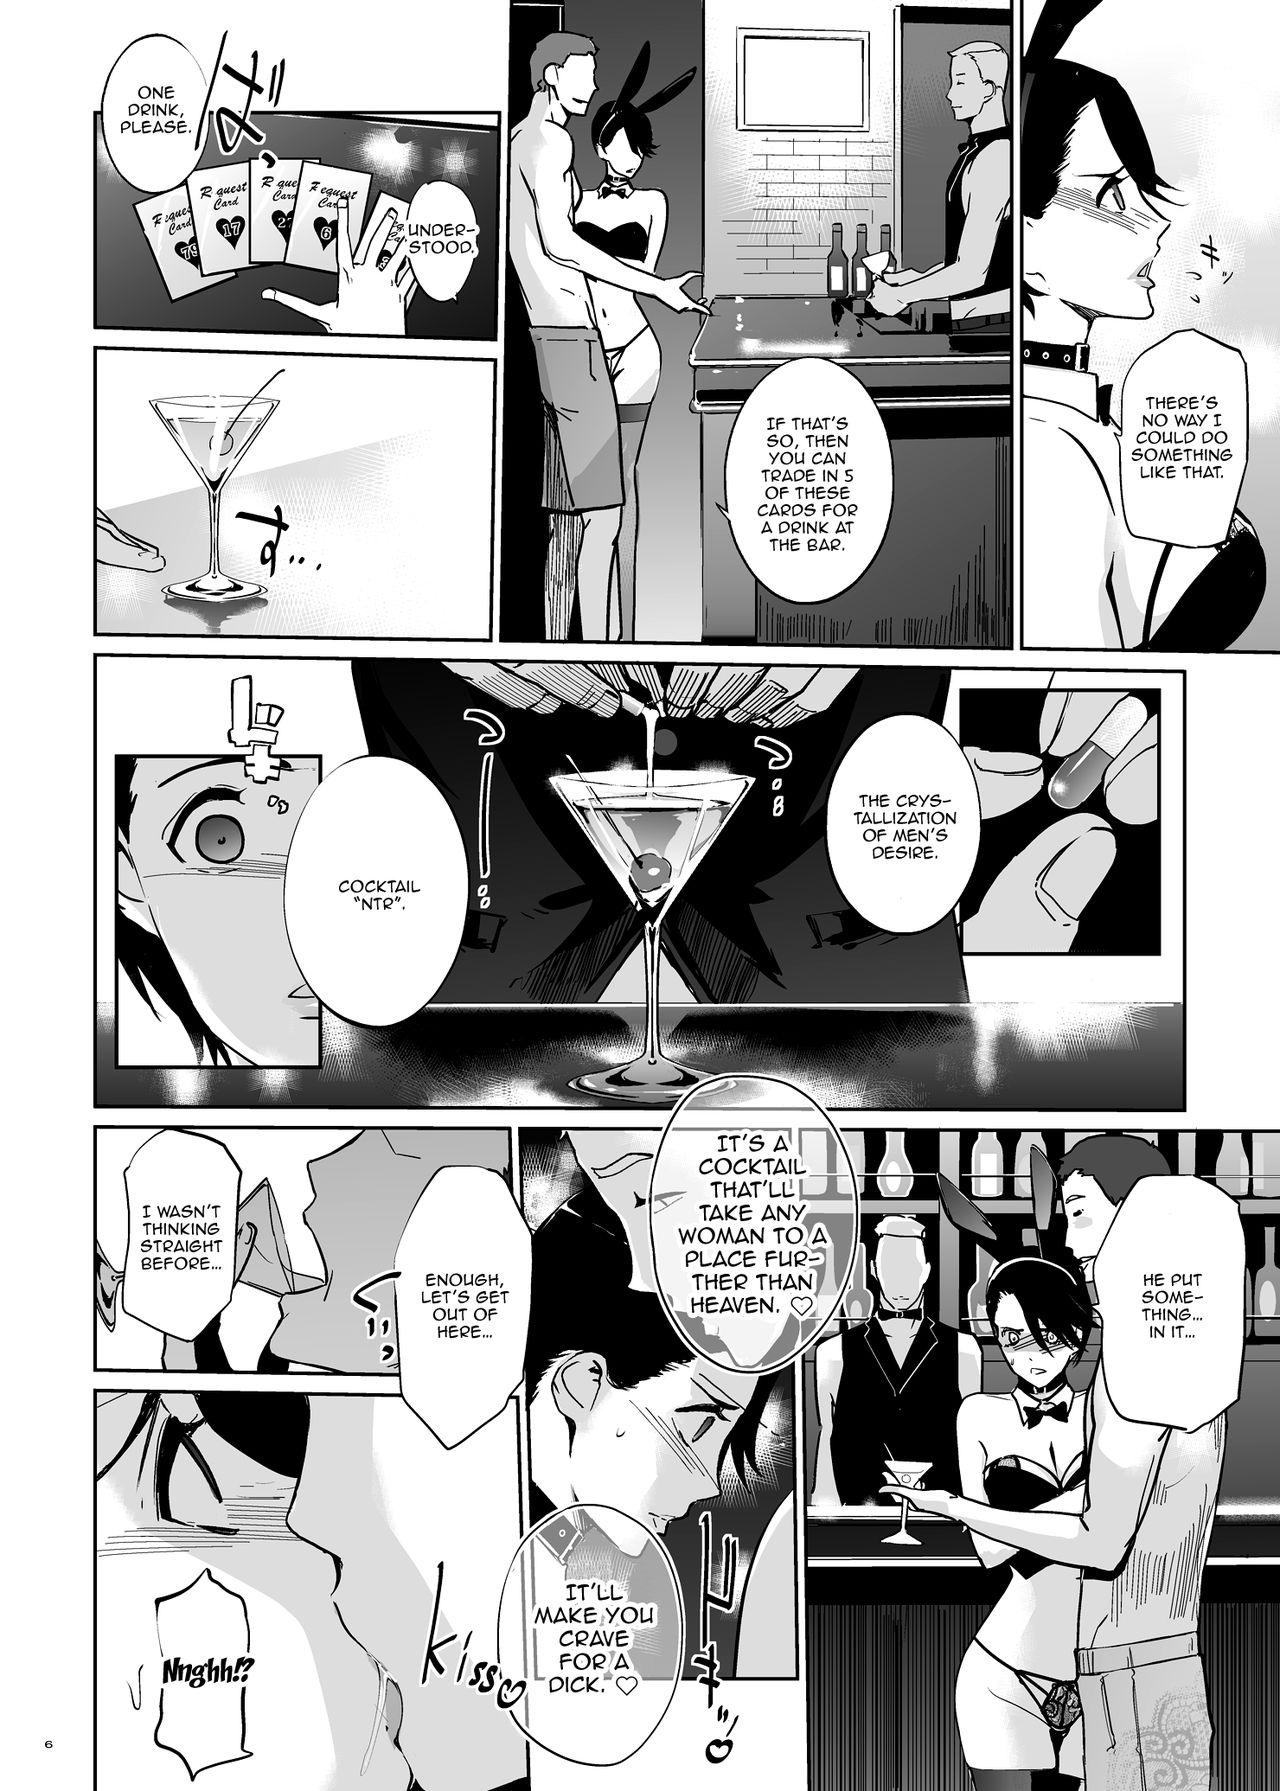 Fat NTR Midnight Pool Happening Bar Hen - Original Roleplay - Page 5